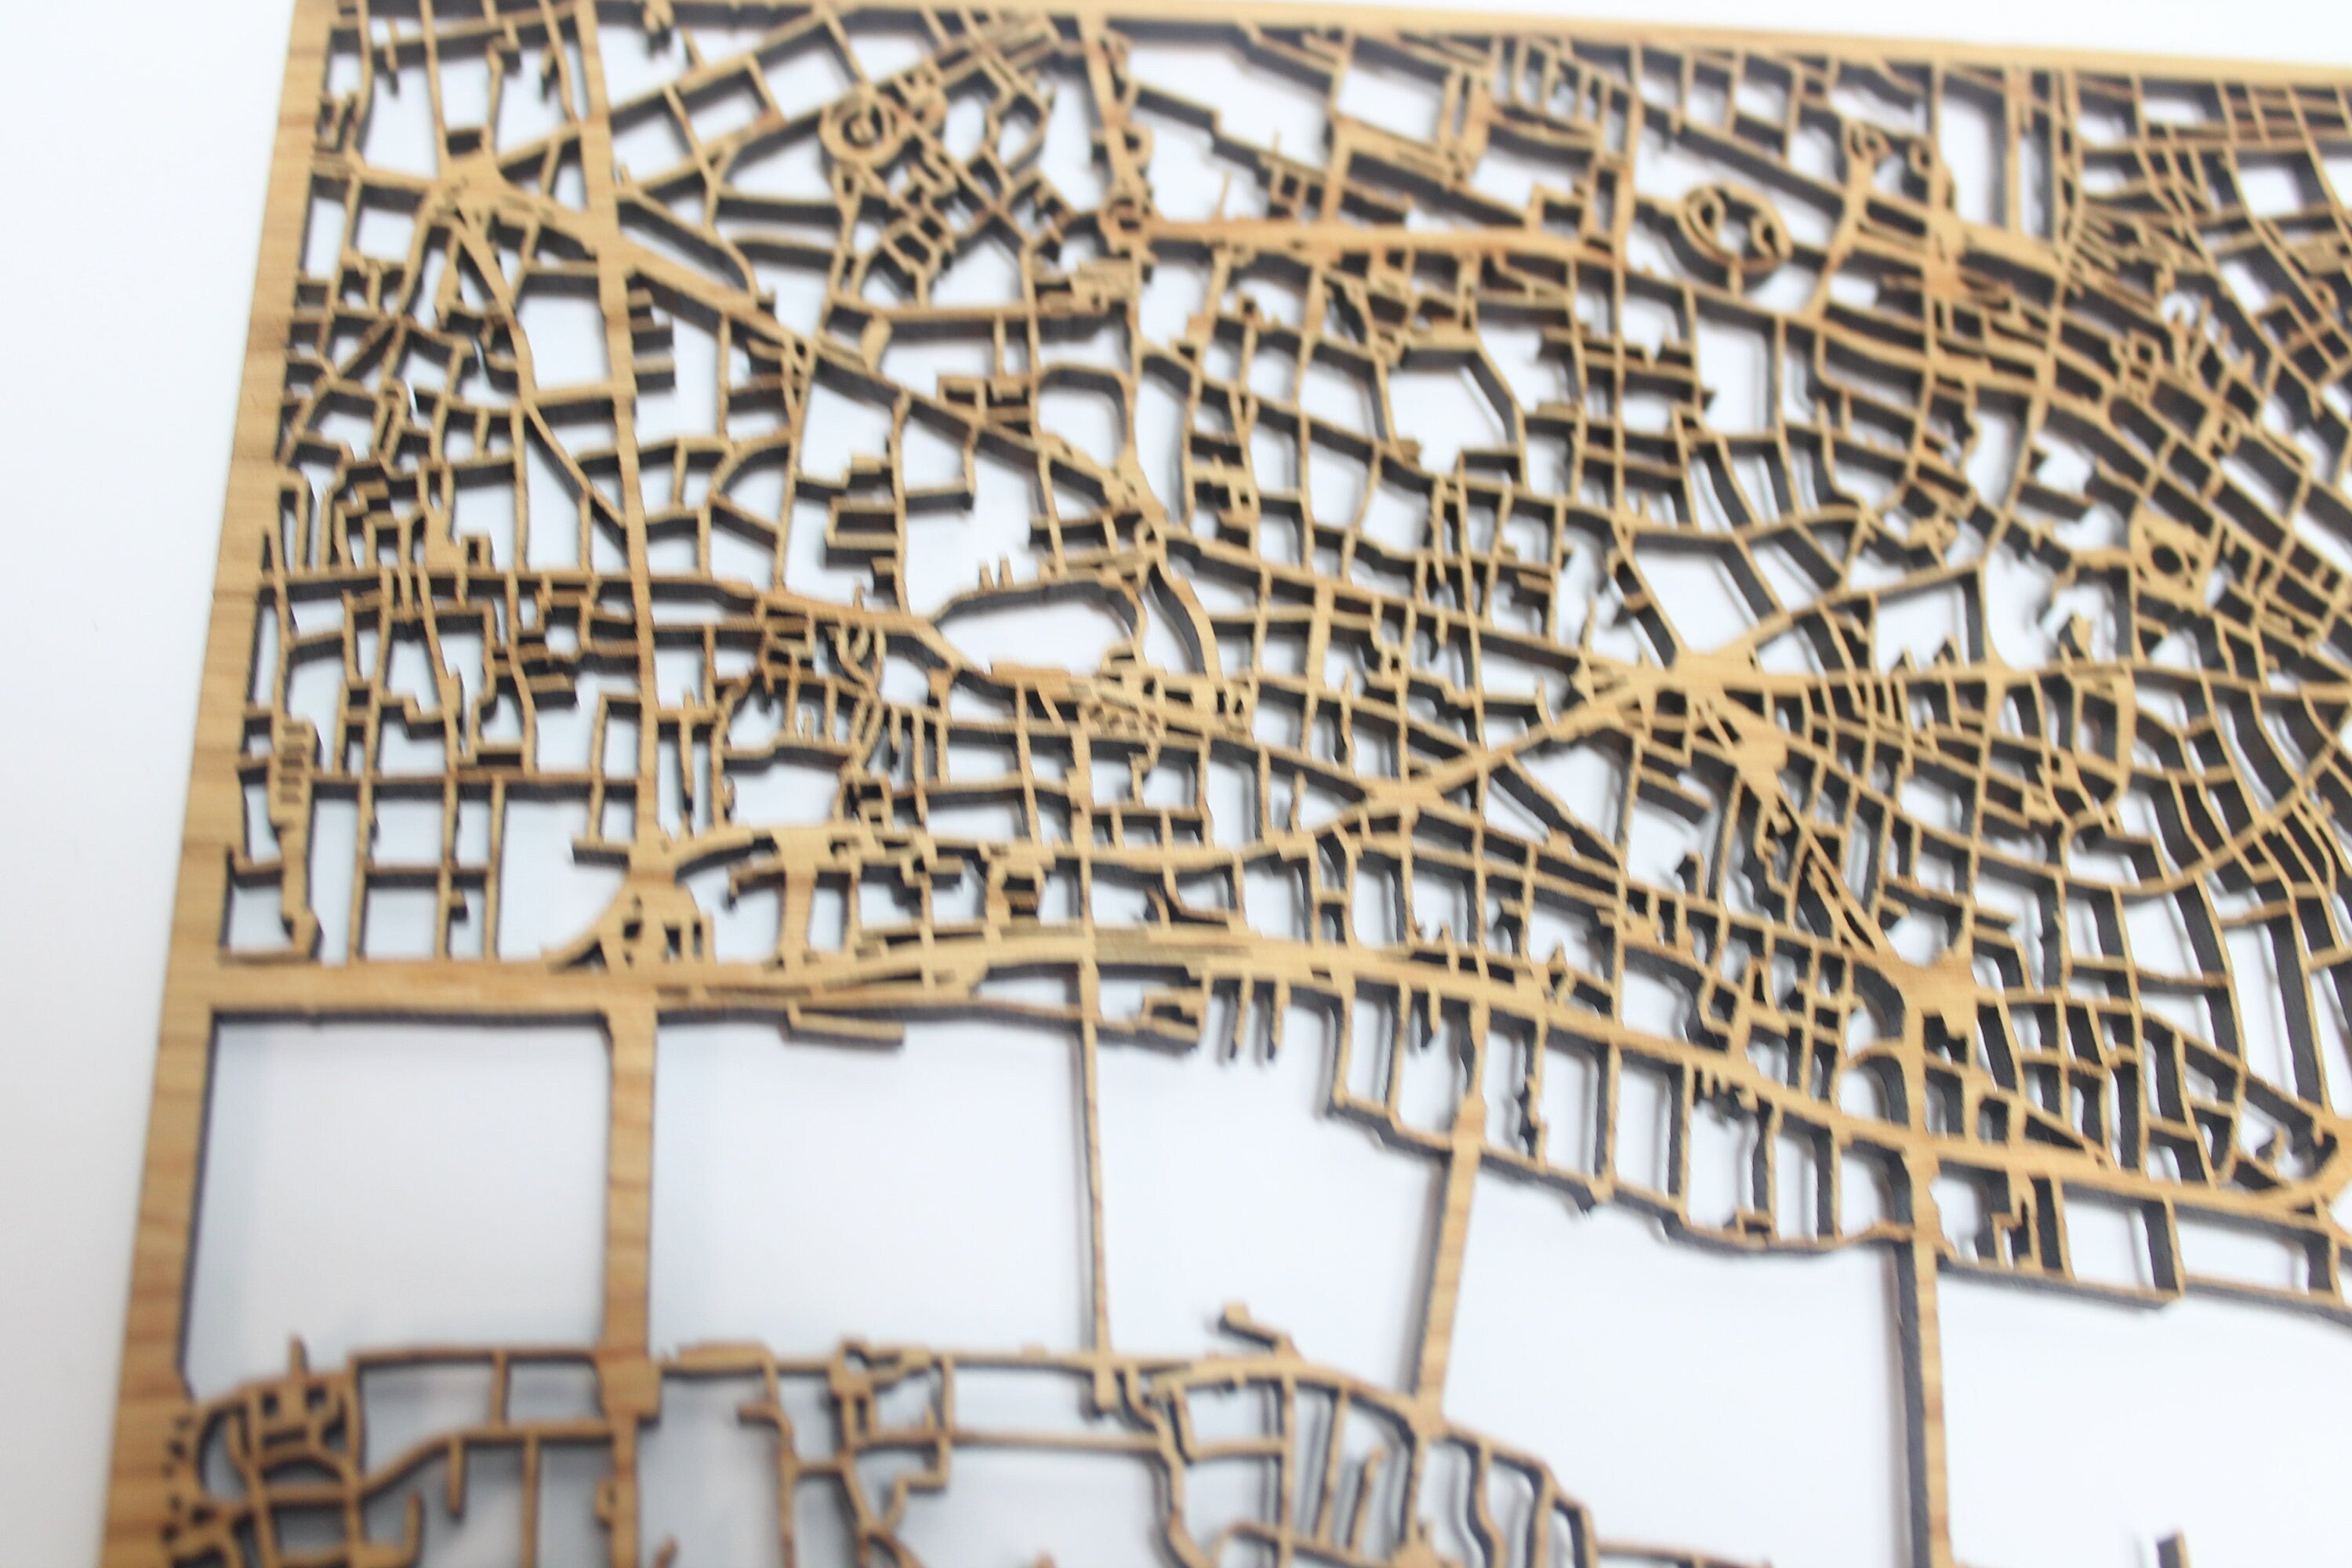 City of London Solid Wood Street Map Laser Cut Street Maps Wooden Map